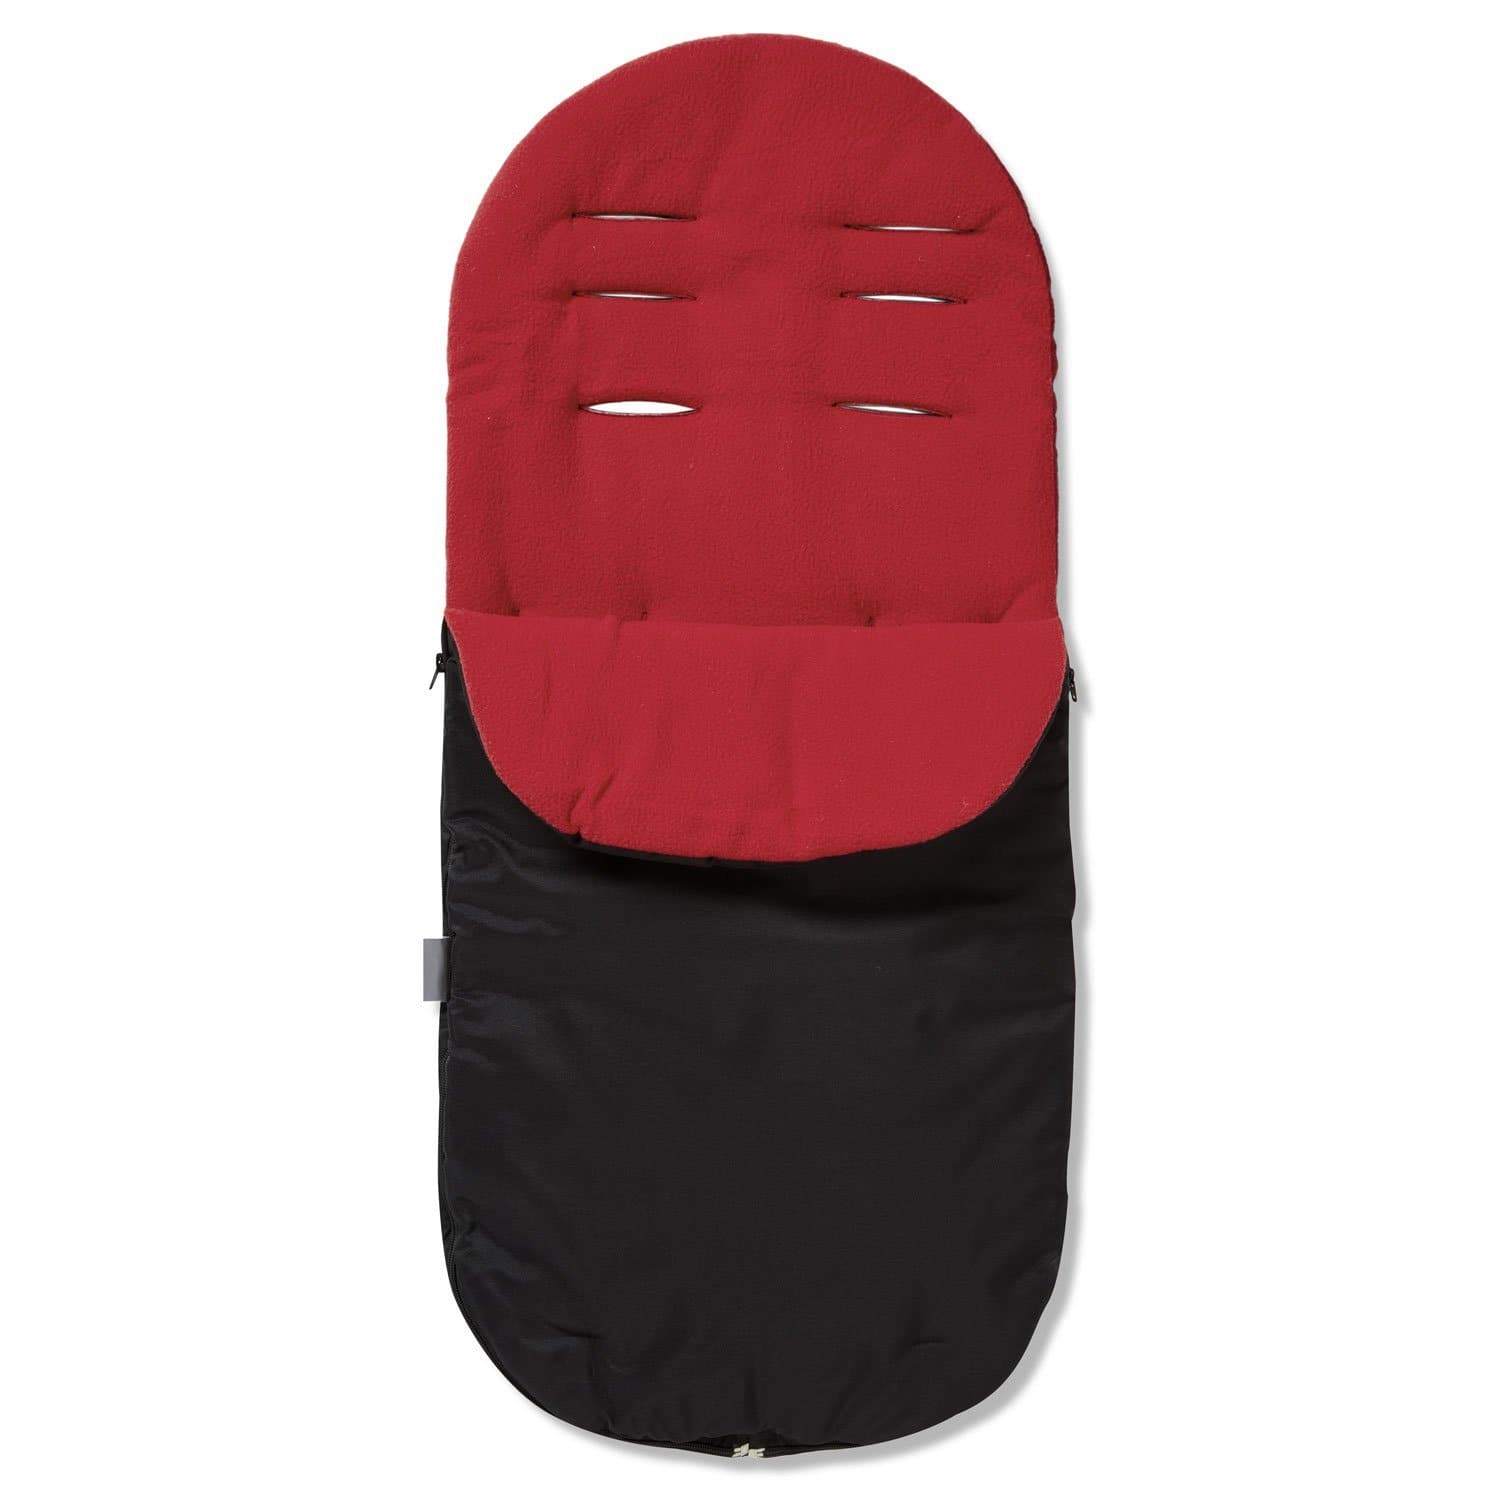 Footmuff / Cosy Toes Compatible with Little Shield - Red / Fits All Models | For Your Little One